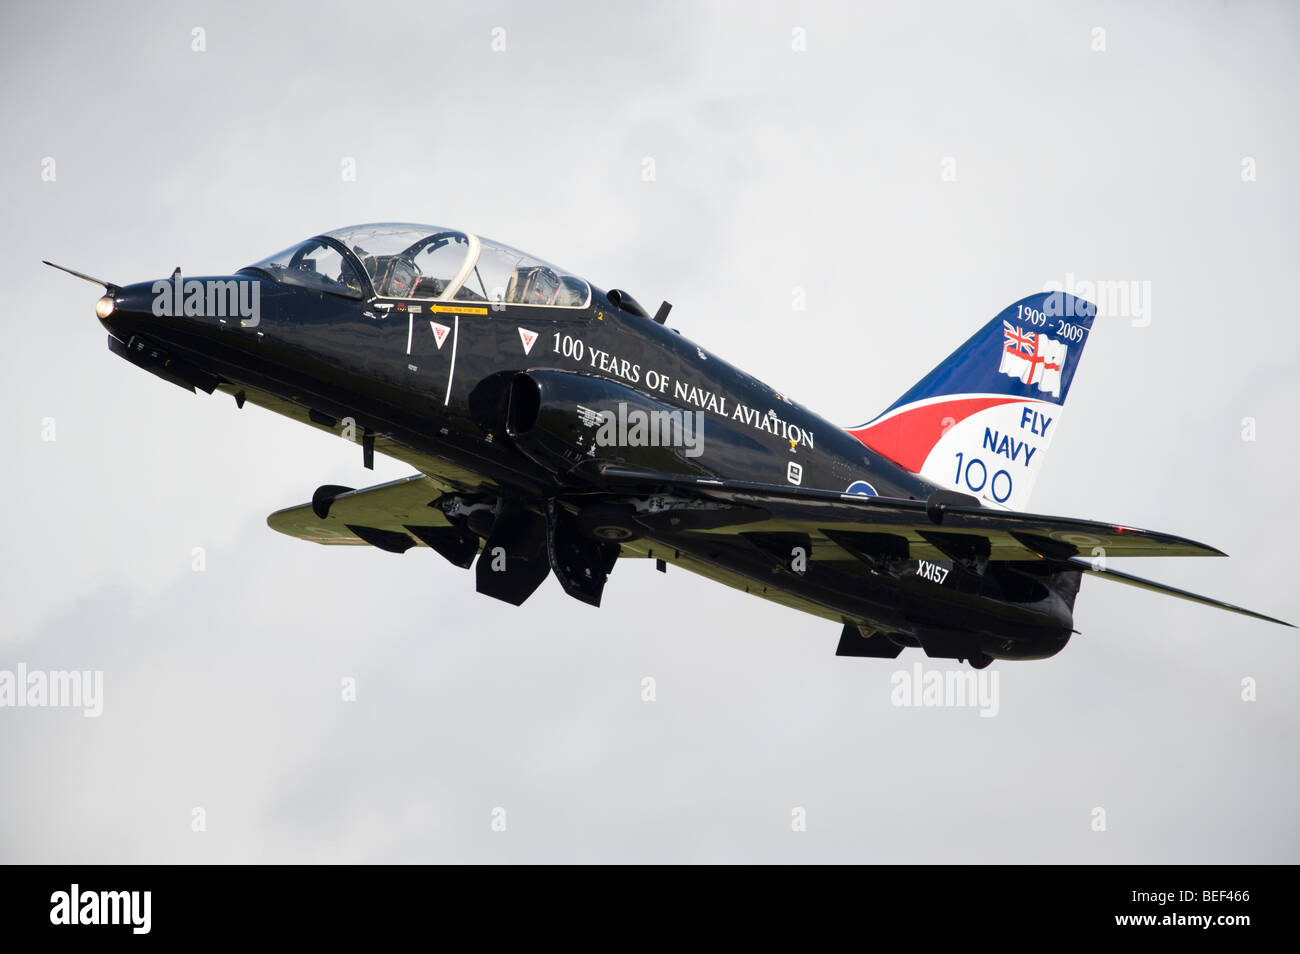 BAE Systems Hawk aircraft decorated in '100 Year of Naval Aviation' paint scheme. Stock Photo